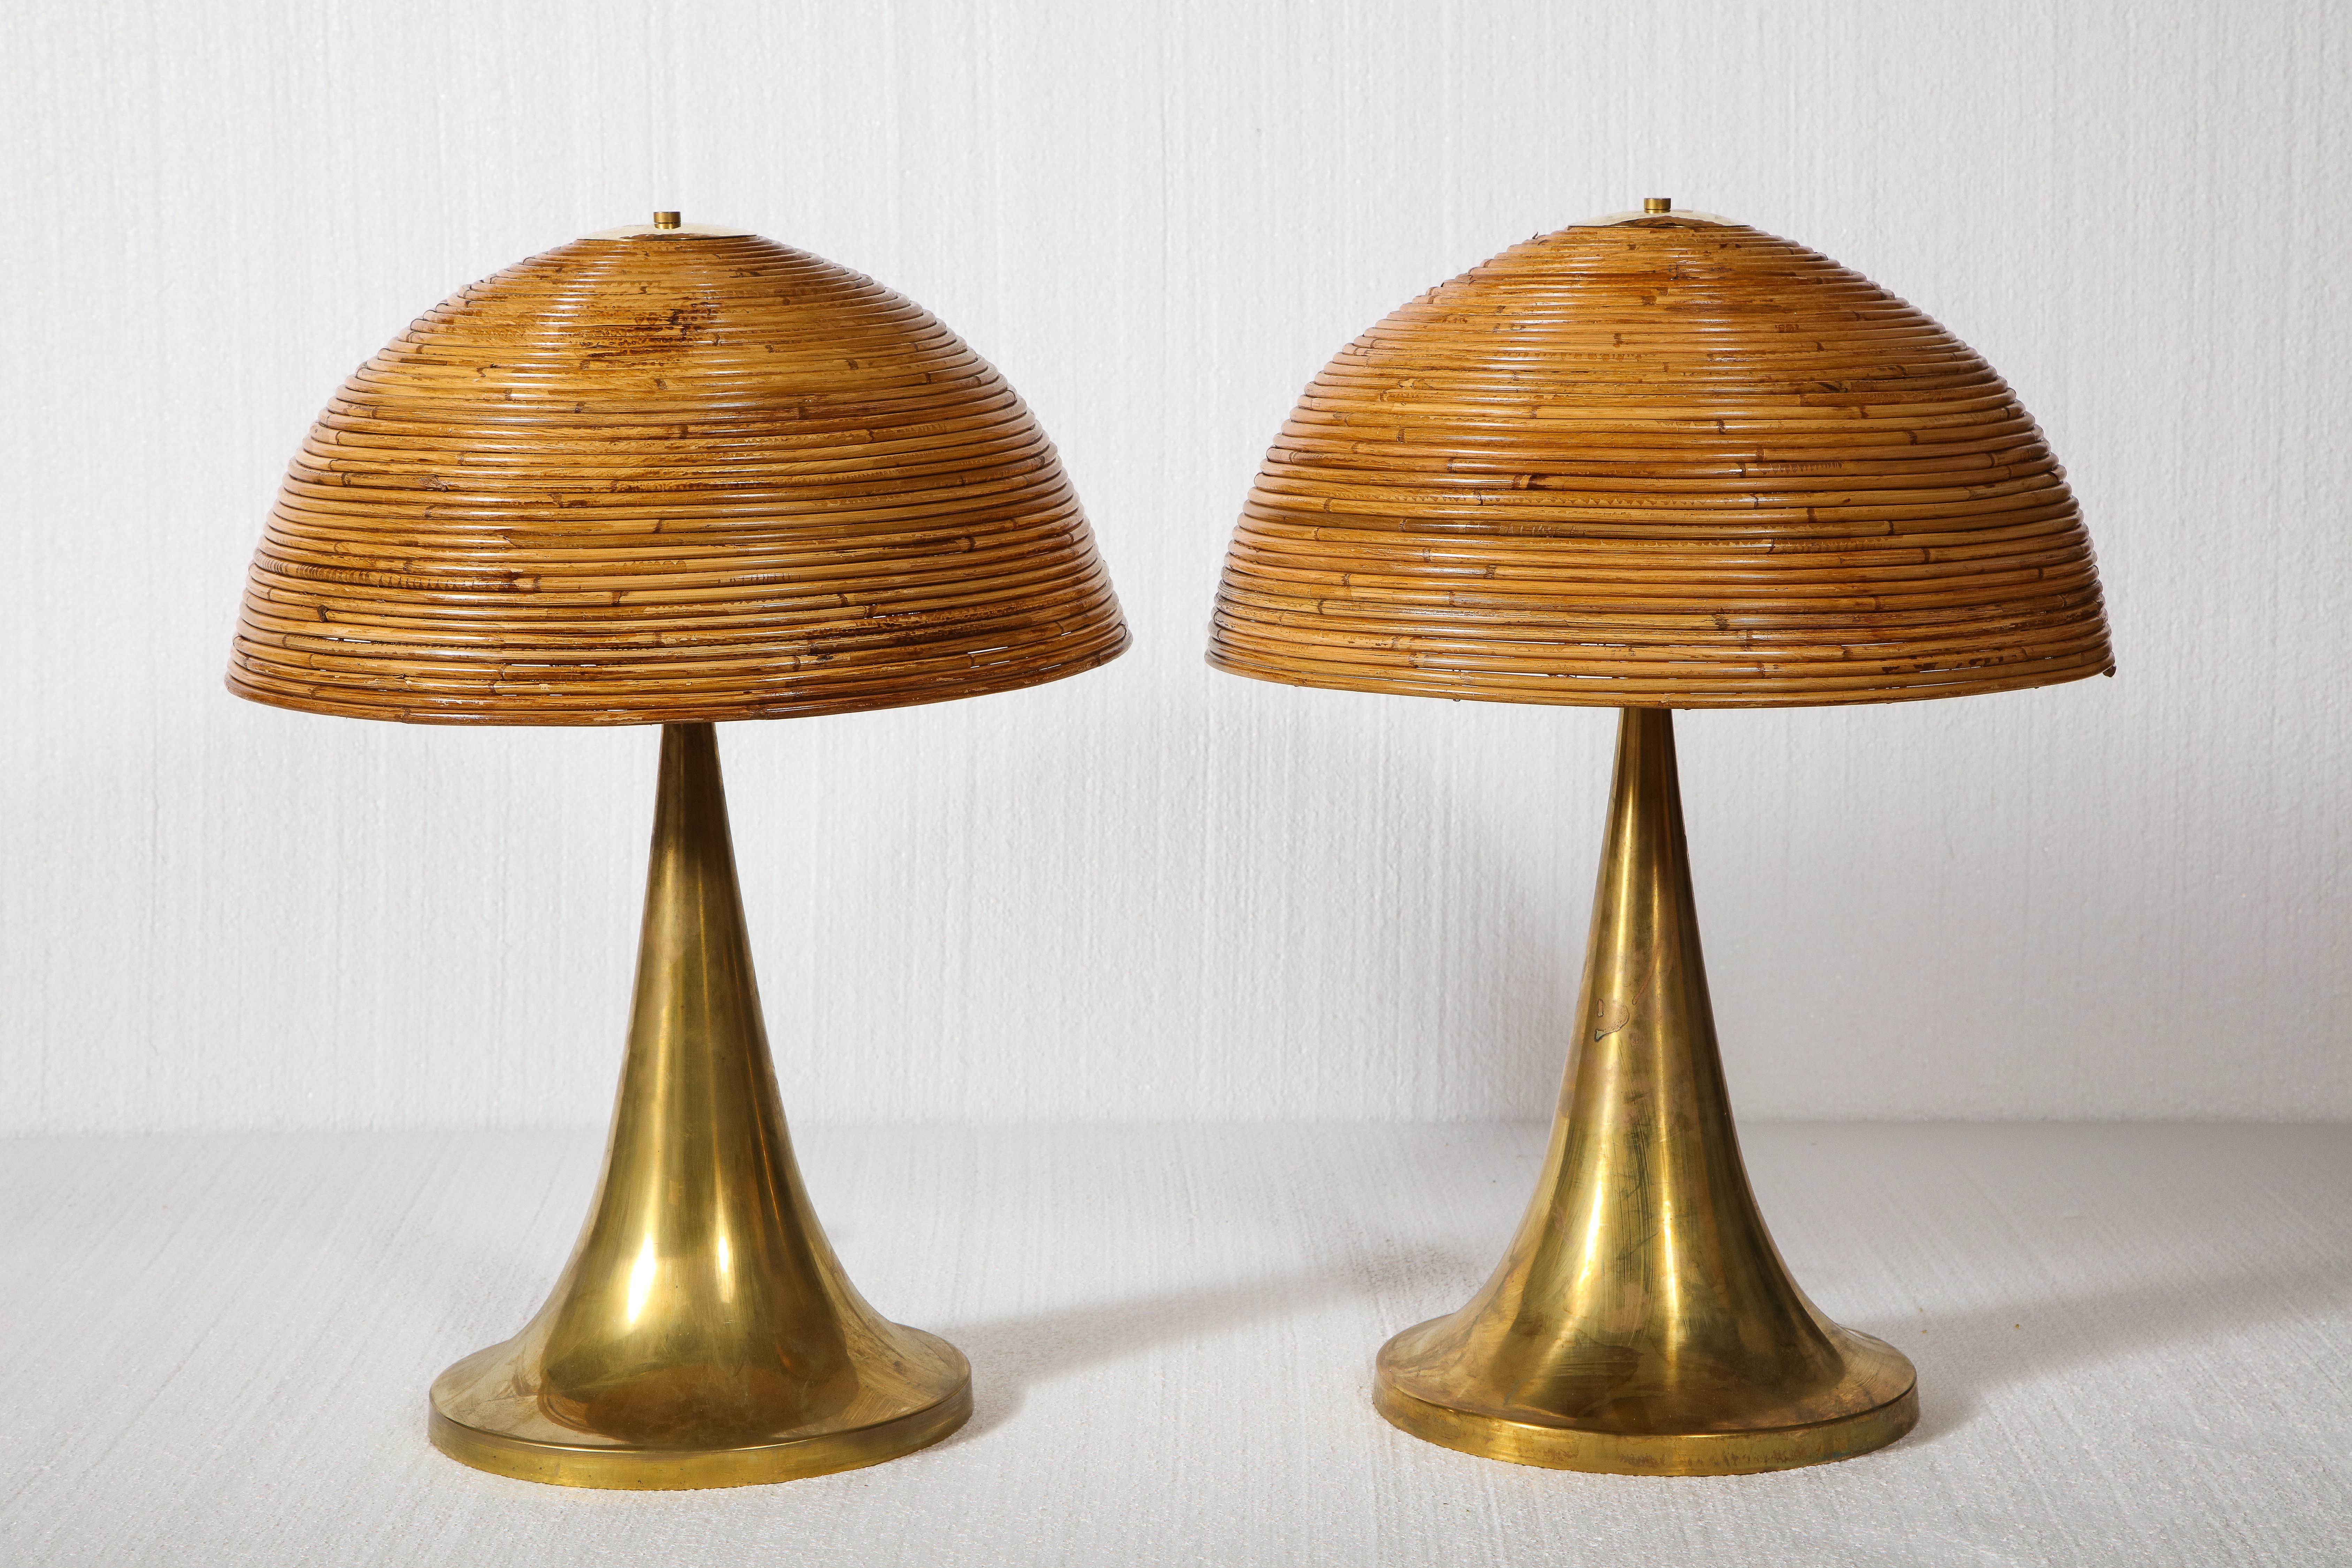 large bamboo pair of table lamps with brass bases.

Beautiful and chic table lamps. Lovely brass bases and bamboo tops held by brass top.